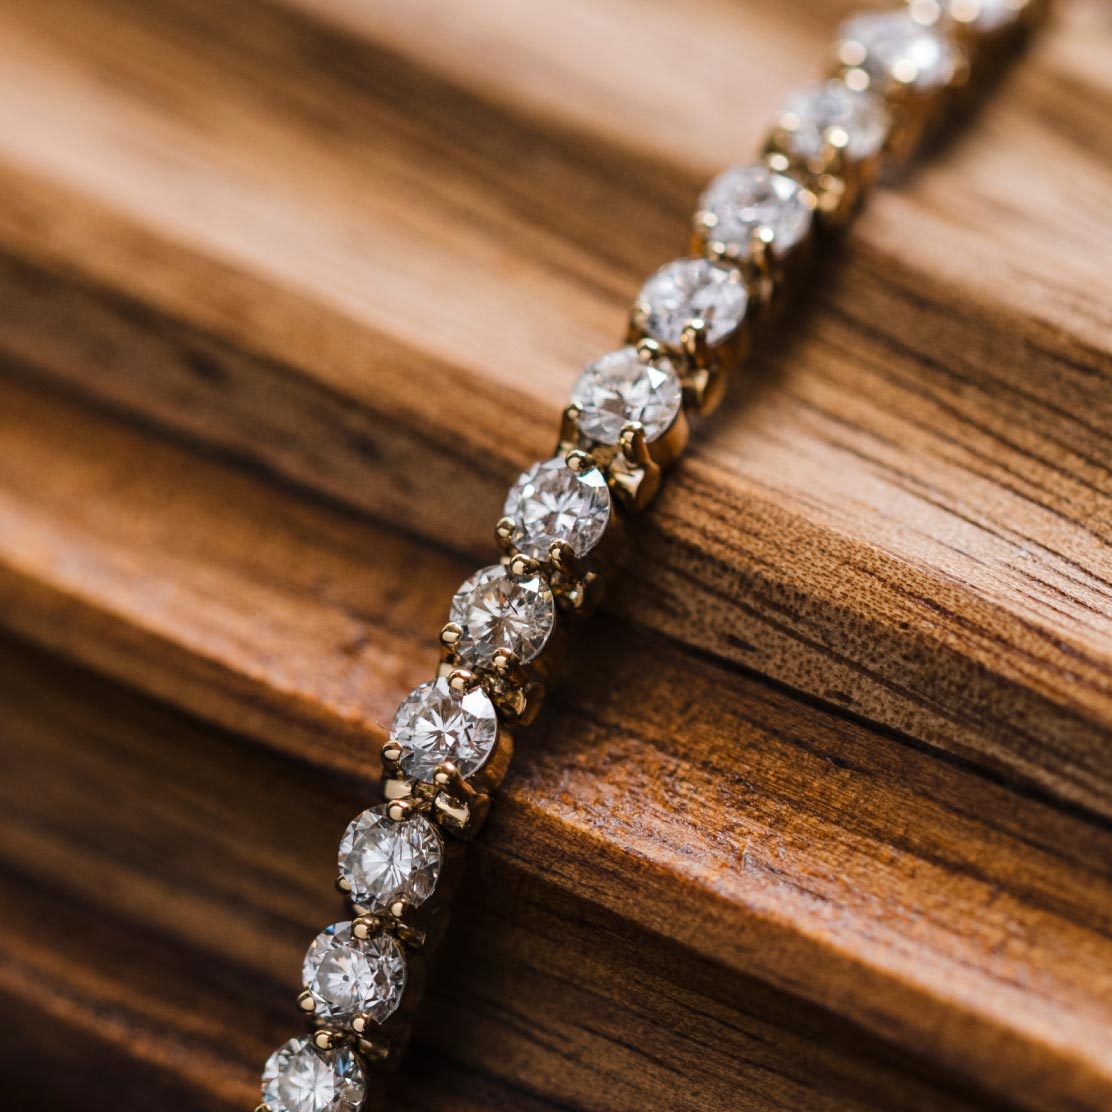 Diamond bracelet laying across curved wooden background